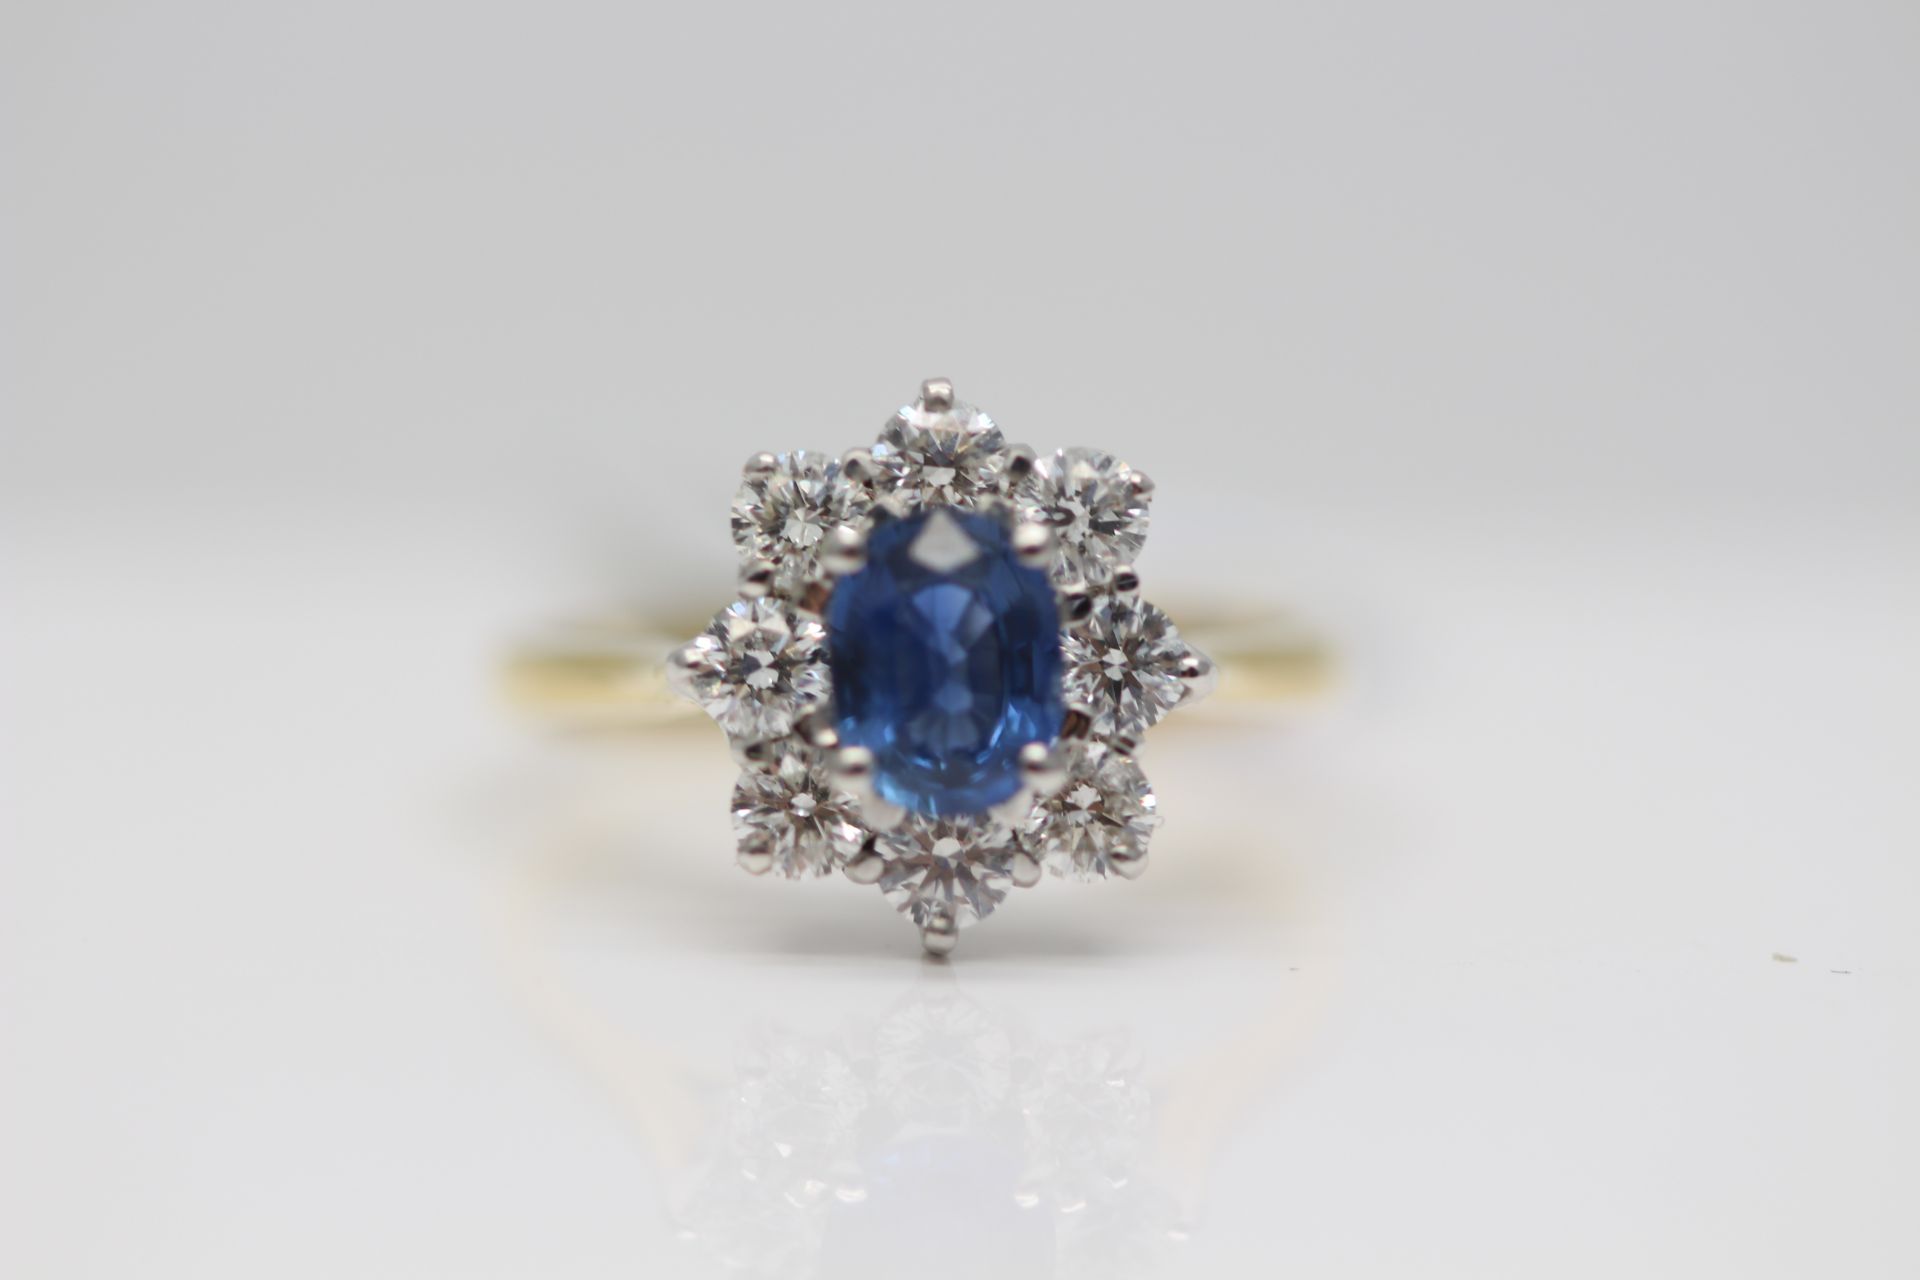 18CT YELLOW GOLD LADIES DIAMOND AND SAPPHIRE CLUSTER RING, SET WITH 0.96 CARATS OF DIAMOND SOLITAIRE